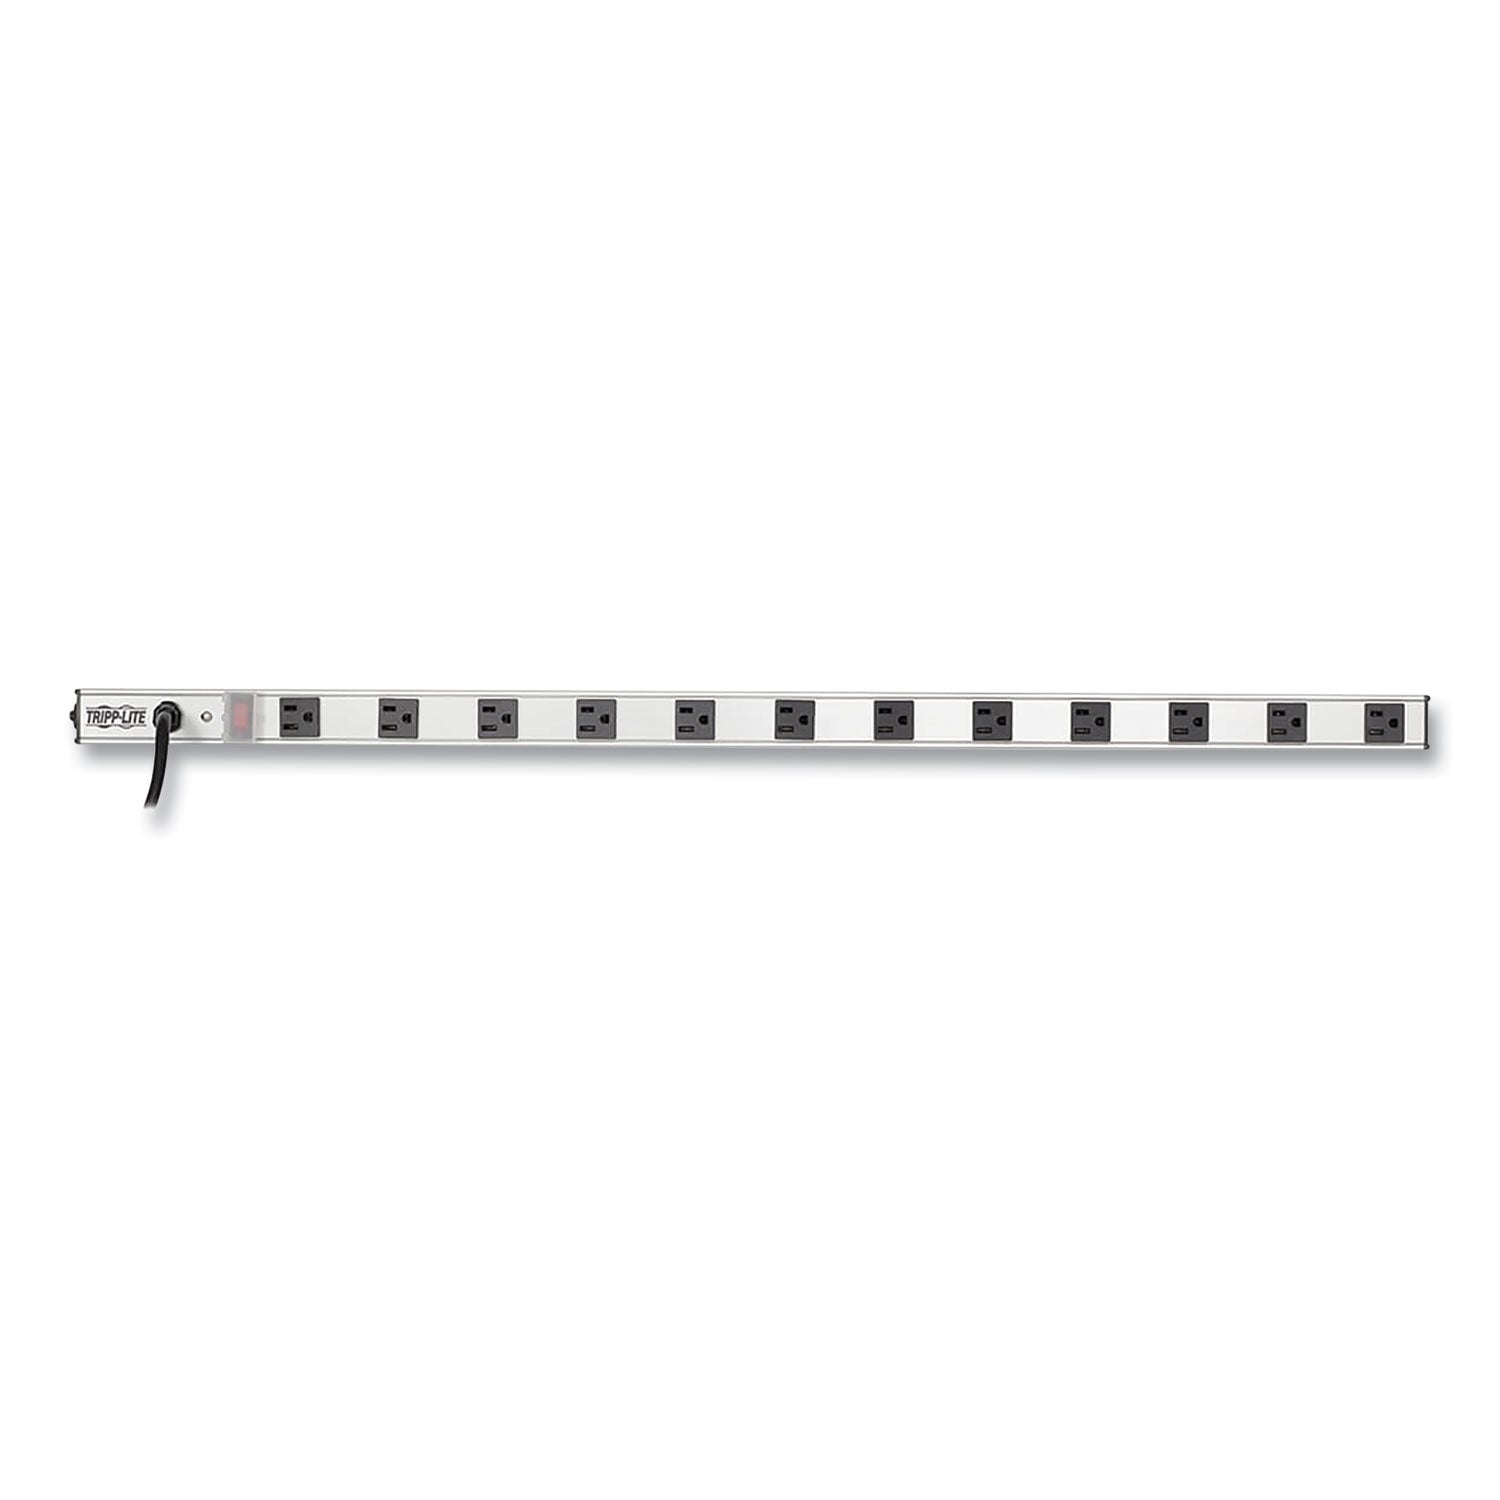 Vertical Power Strip, 12 Outlets, 15 ft Cord, Silver - 